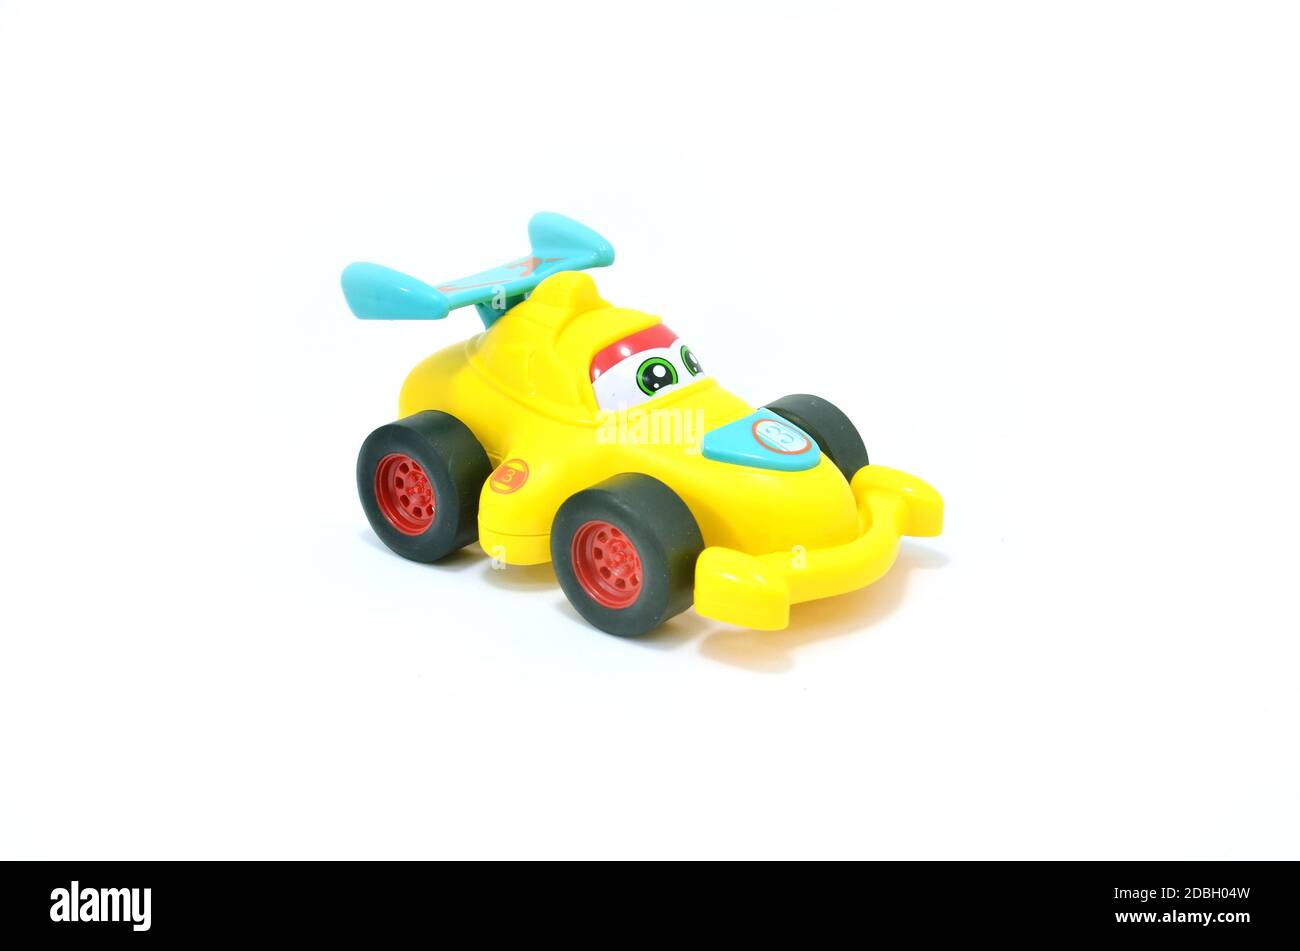 Yellow Toy Race Car Isolated on White Background Stock Photo